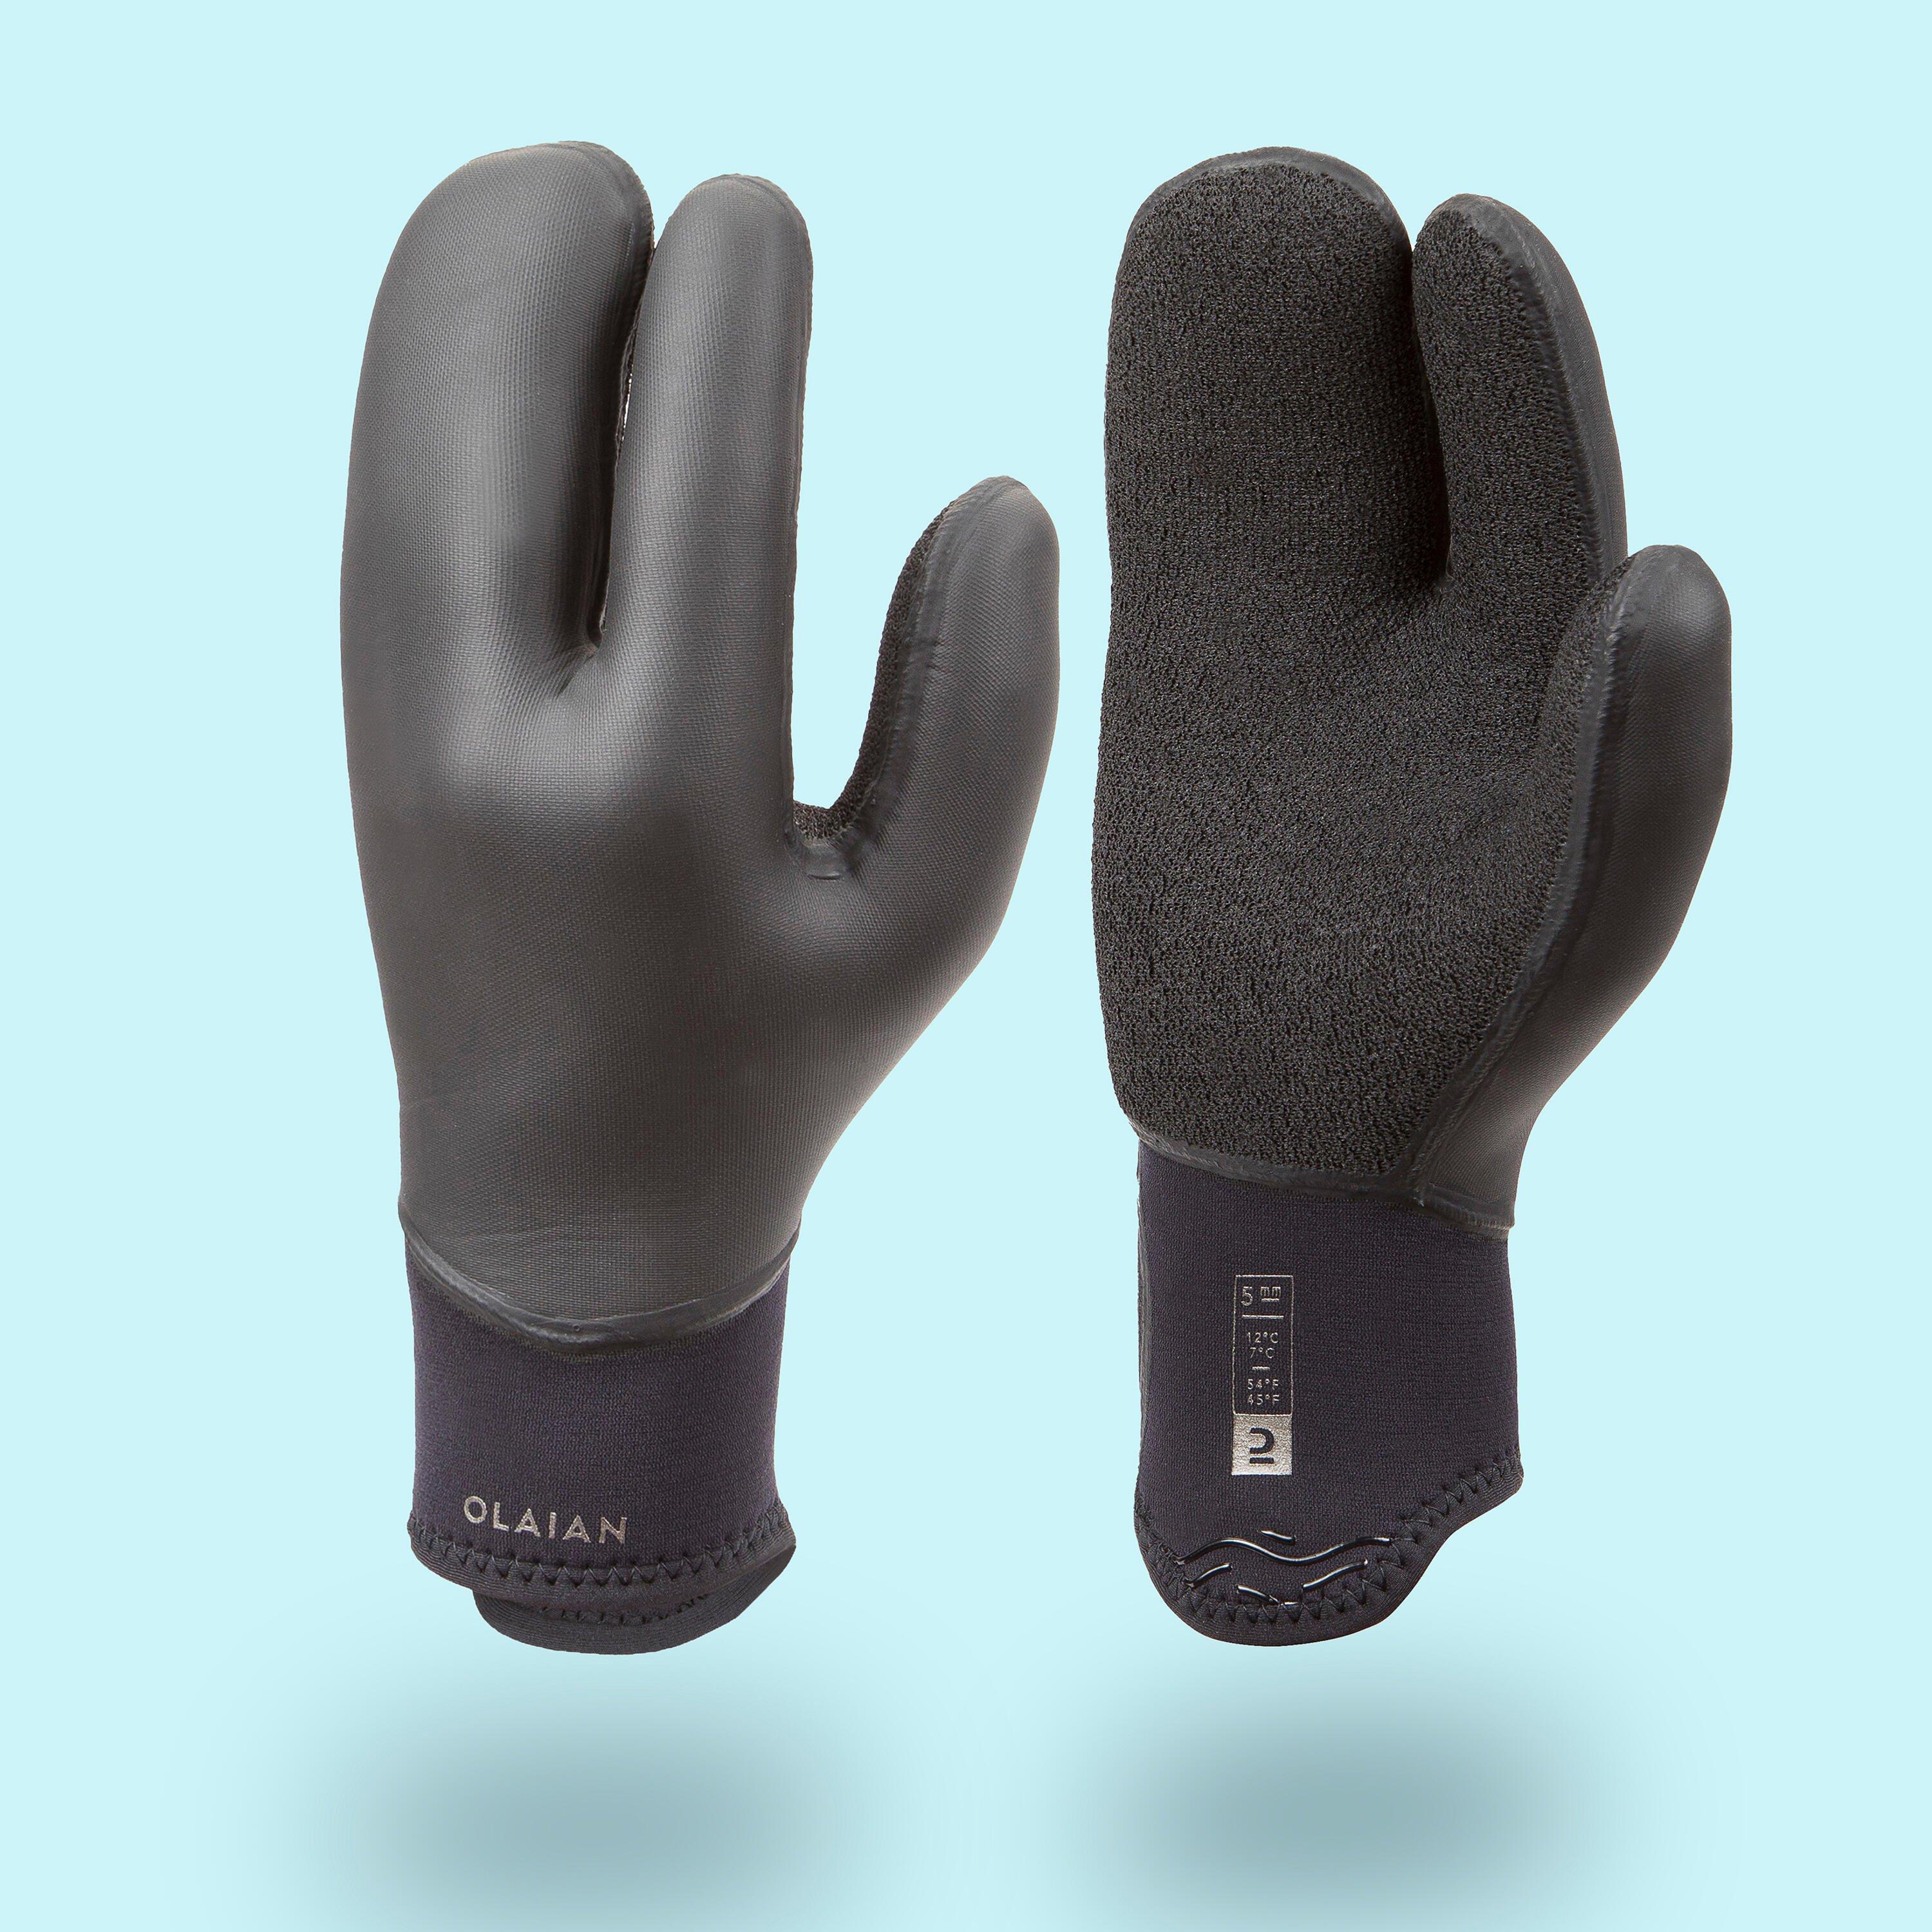 Neoprene Surf Gloves For Very Cold Water 5 Mm